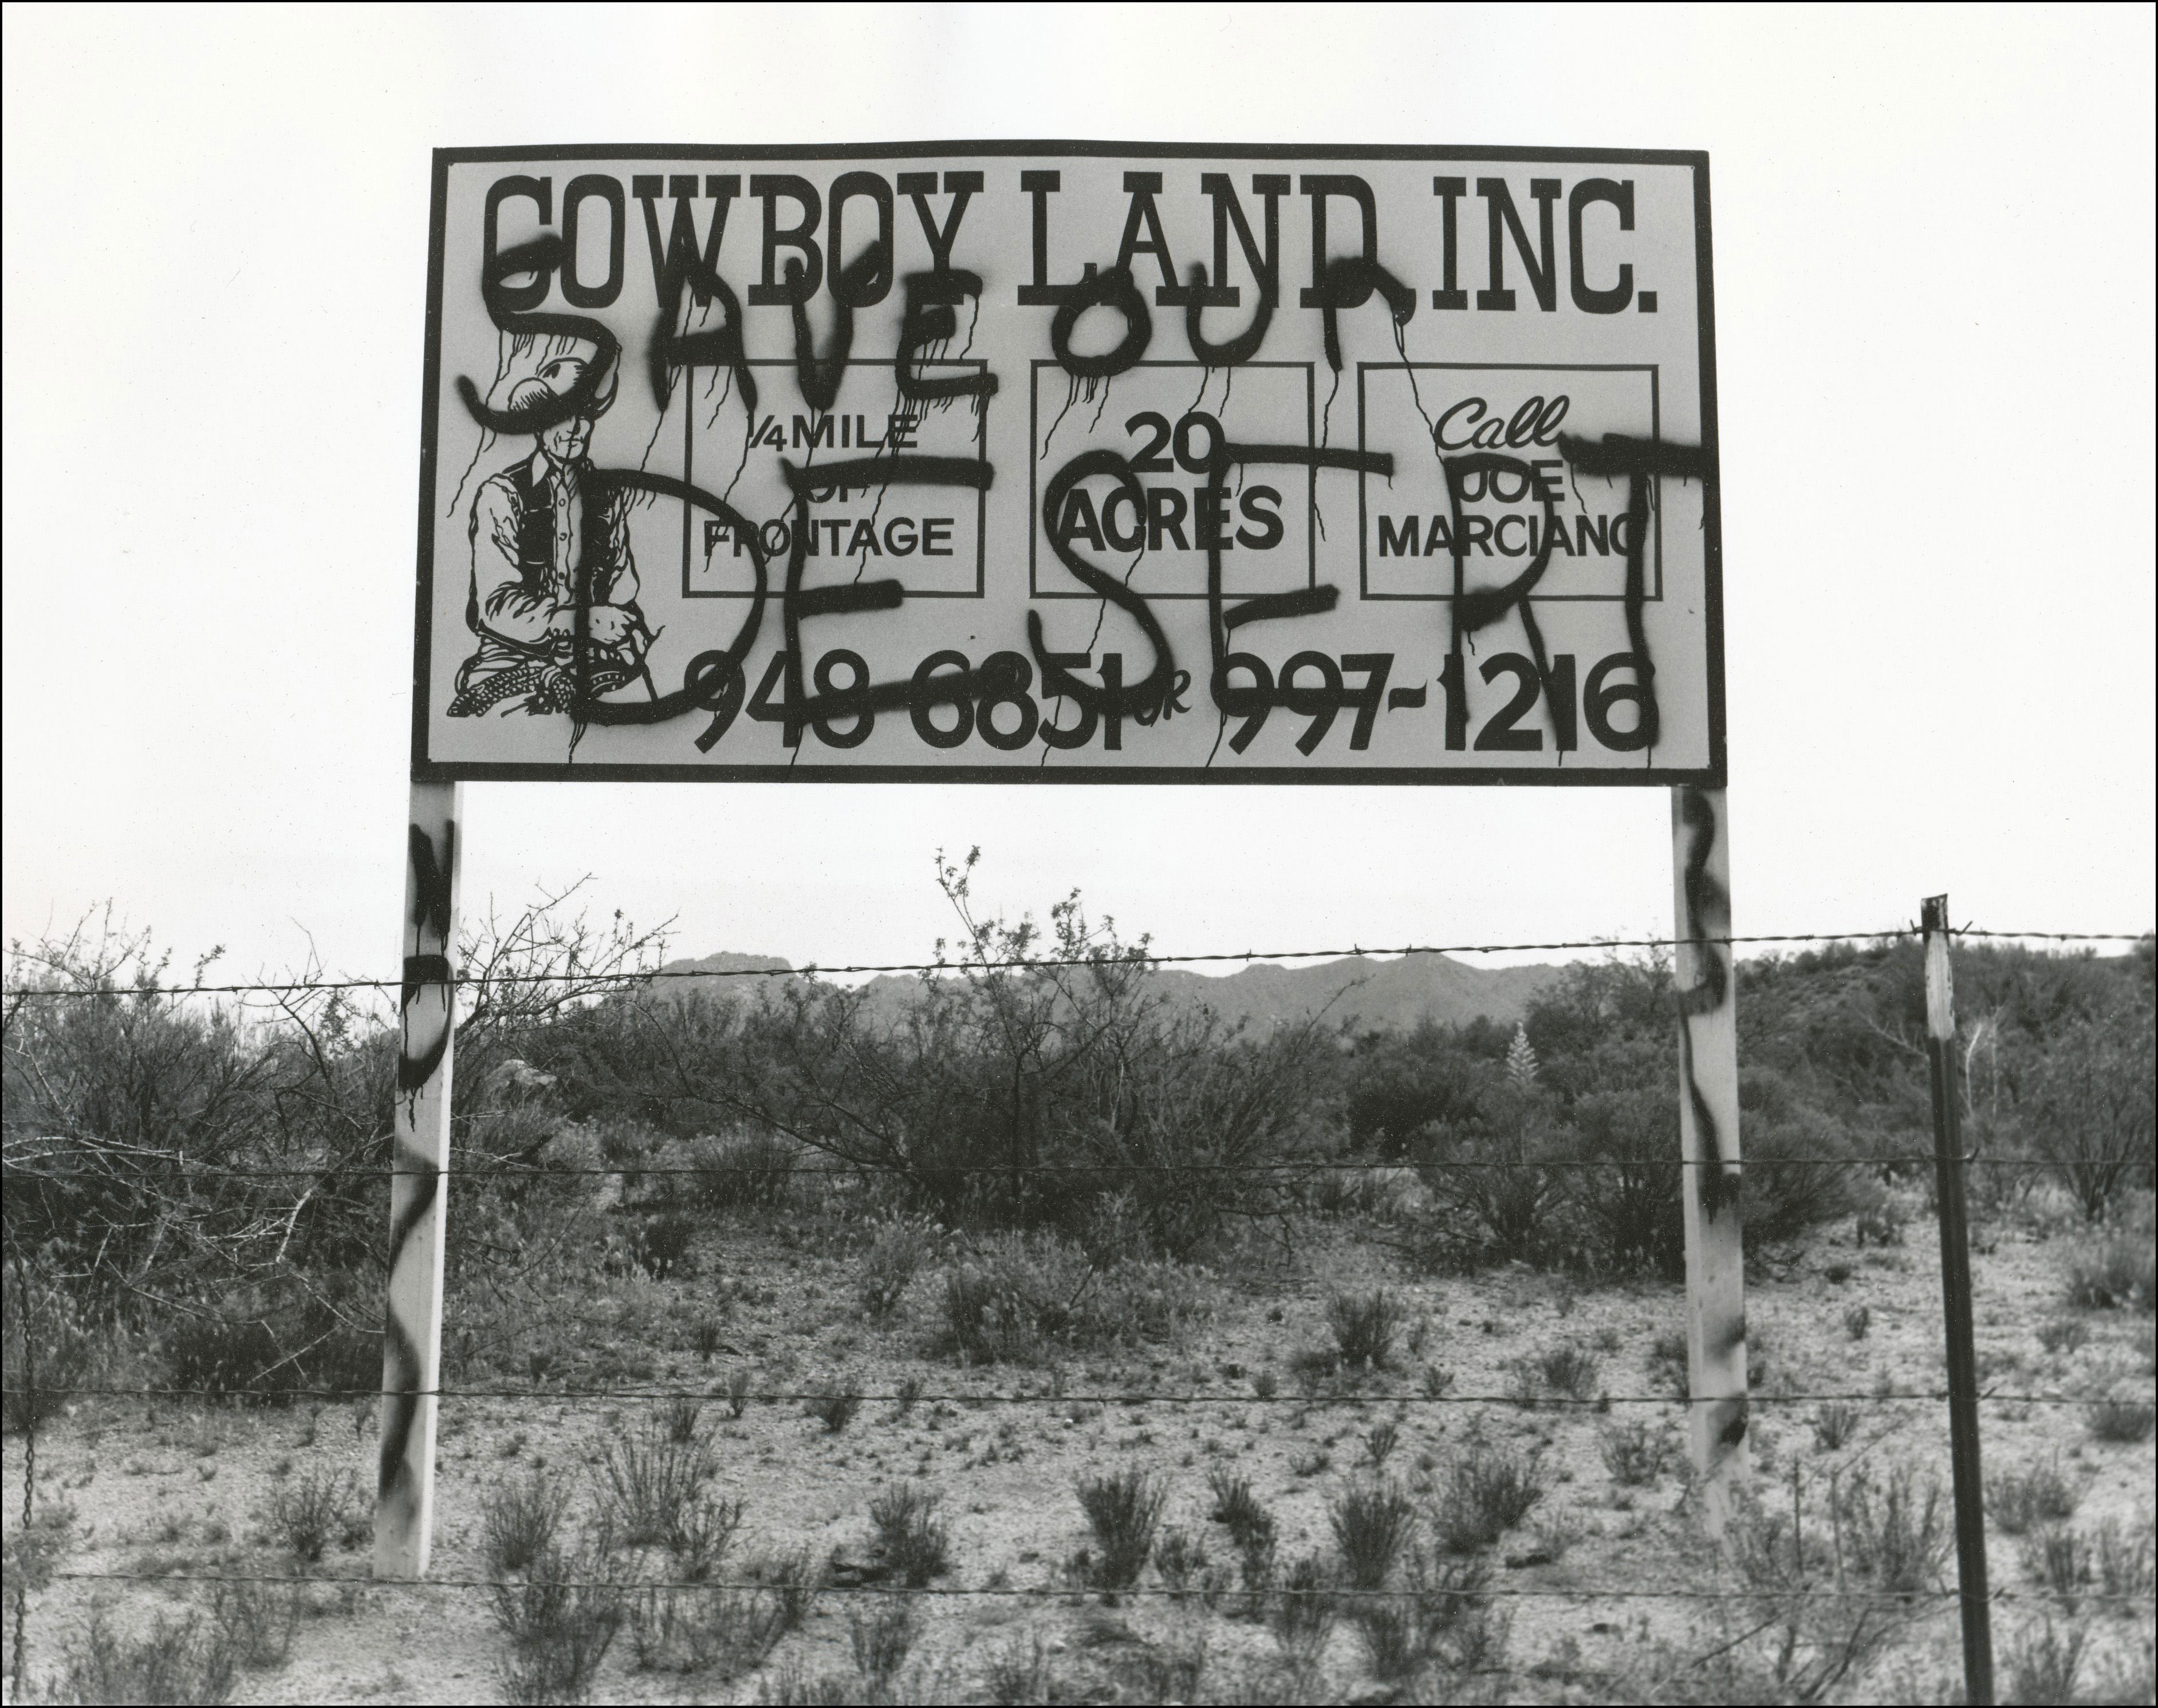 Sign on the side of a road that says Cowboy Land Inc. Quarter mile of frontage, 20 acres, call Joe Marciano, 949-6851, 997-1216. Spray painted over with the words Save our Desert